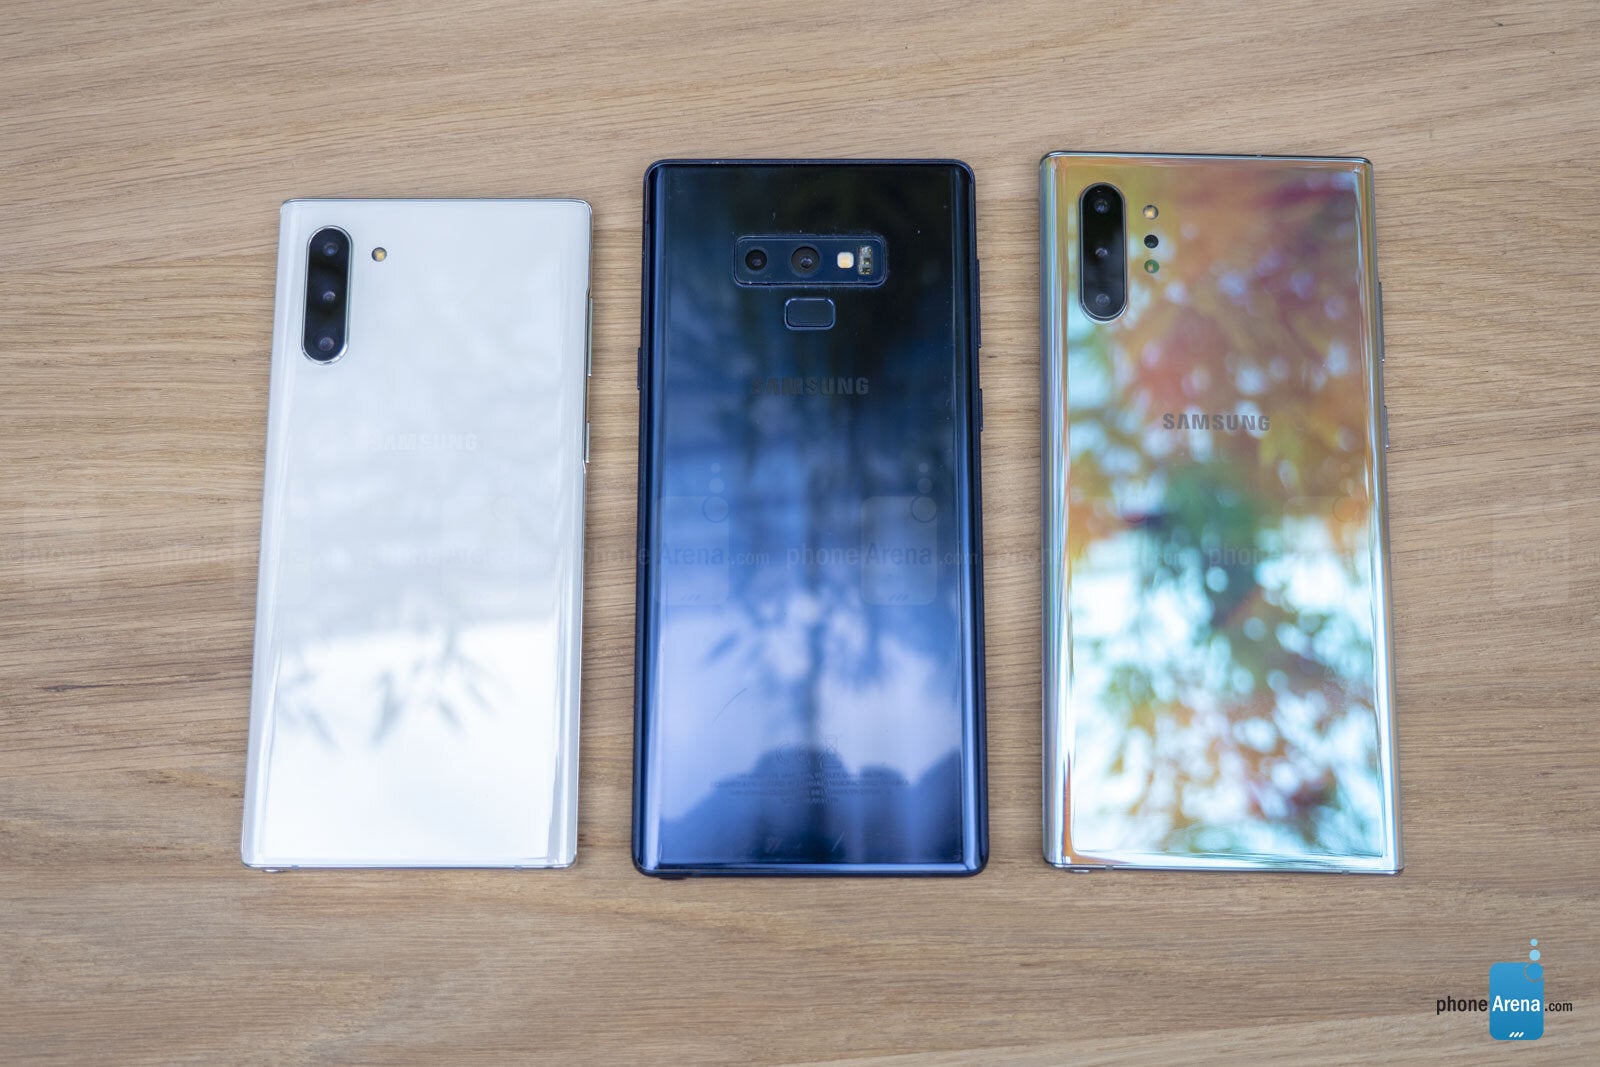 Samsung Galaxy Note 10 vs Galaxy Note 9: What’s new? Worth an upgrade?